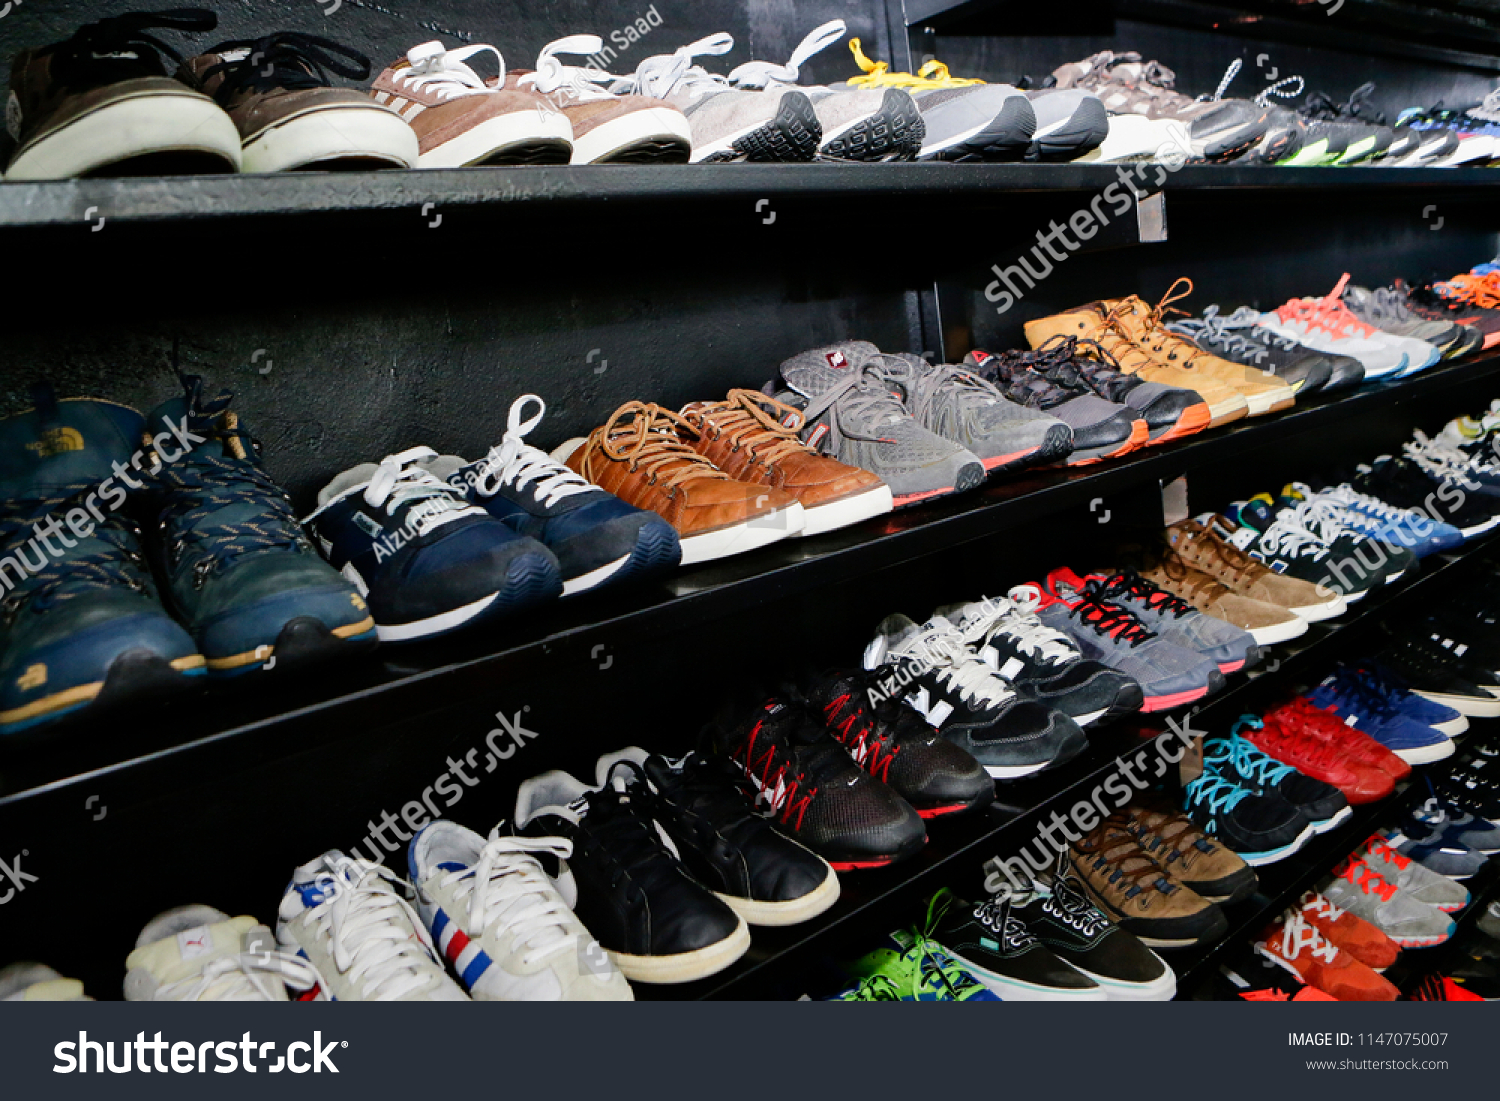 327 Shoes collector Images, Stock Photos & Vectors | Shutterstock